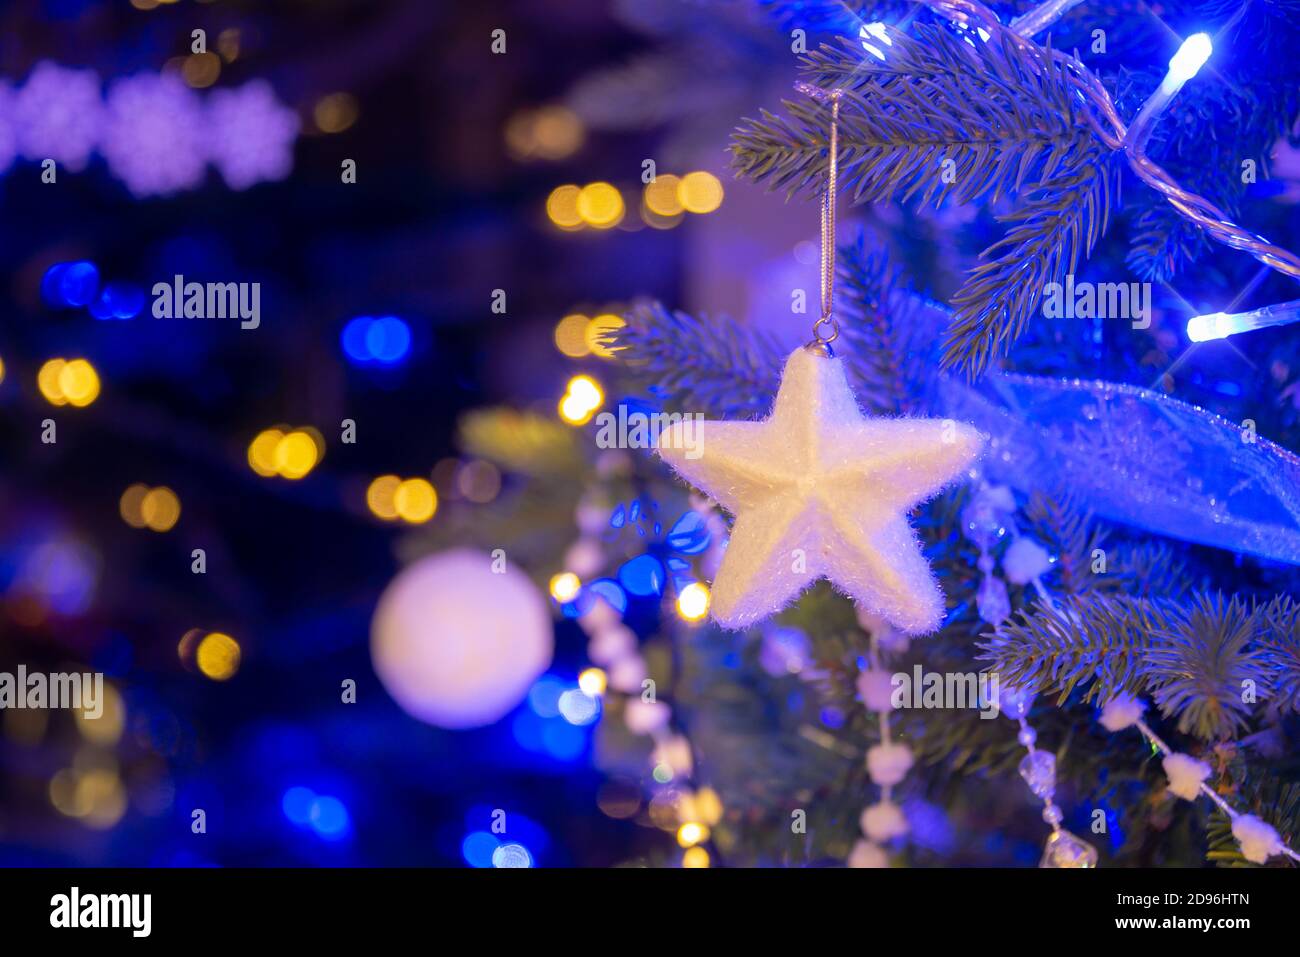 White star hanging on a Christmas tree, Christmas ornaments at night, white and gold holiday lights Stock Photo